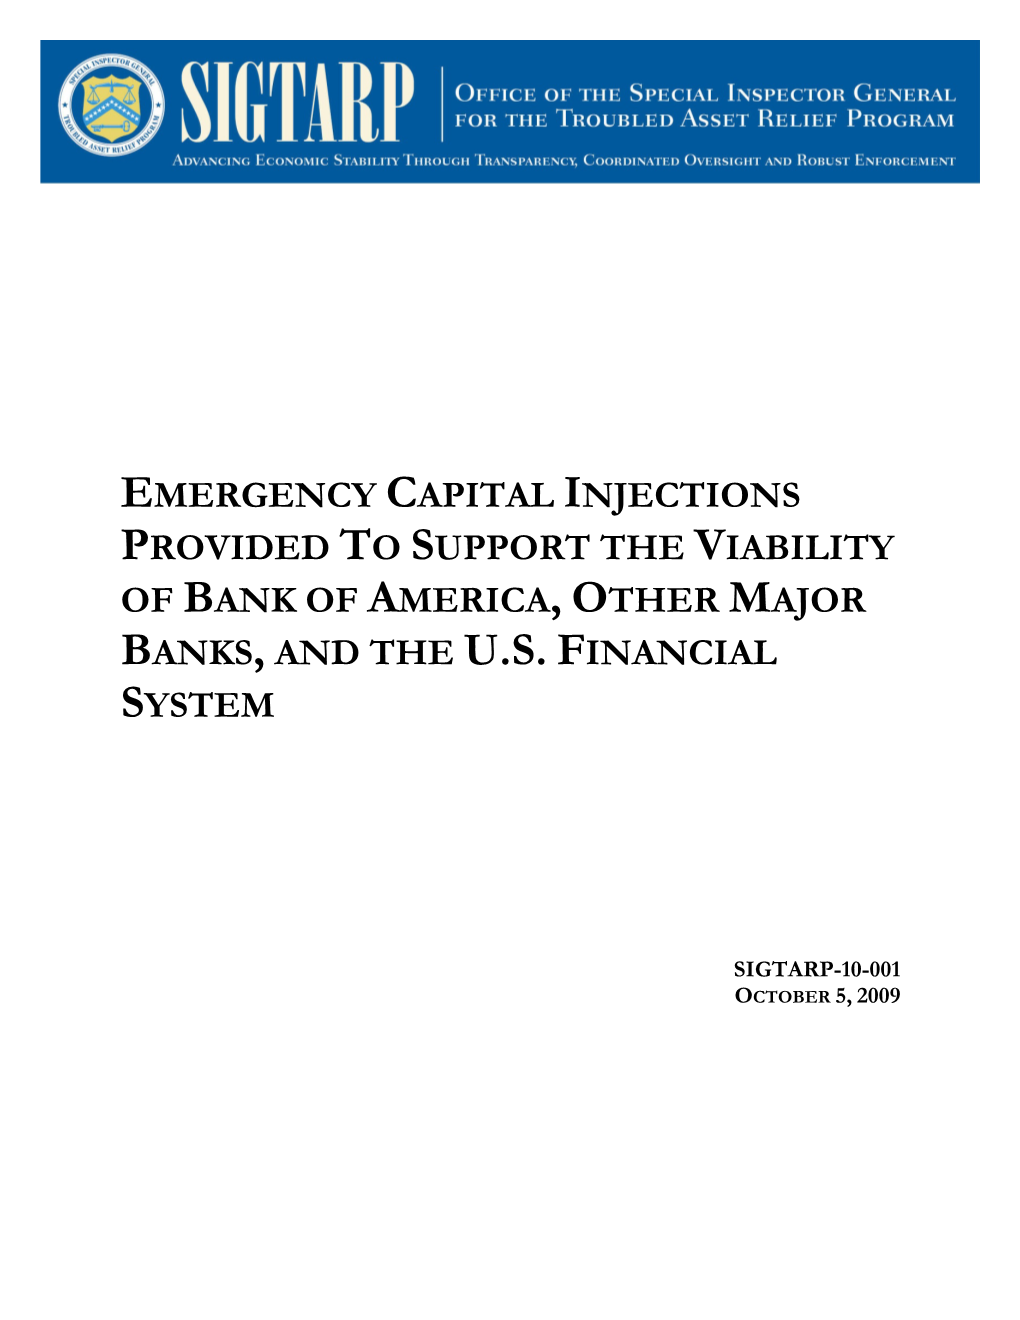 Emergency Capital Injections Provided to Support the Viability of Bank of America, Other Major Banks, and the Us Financial System